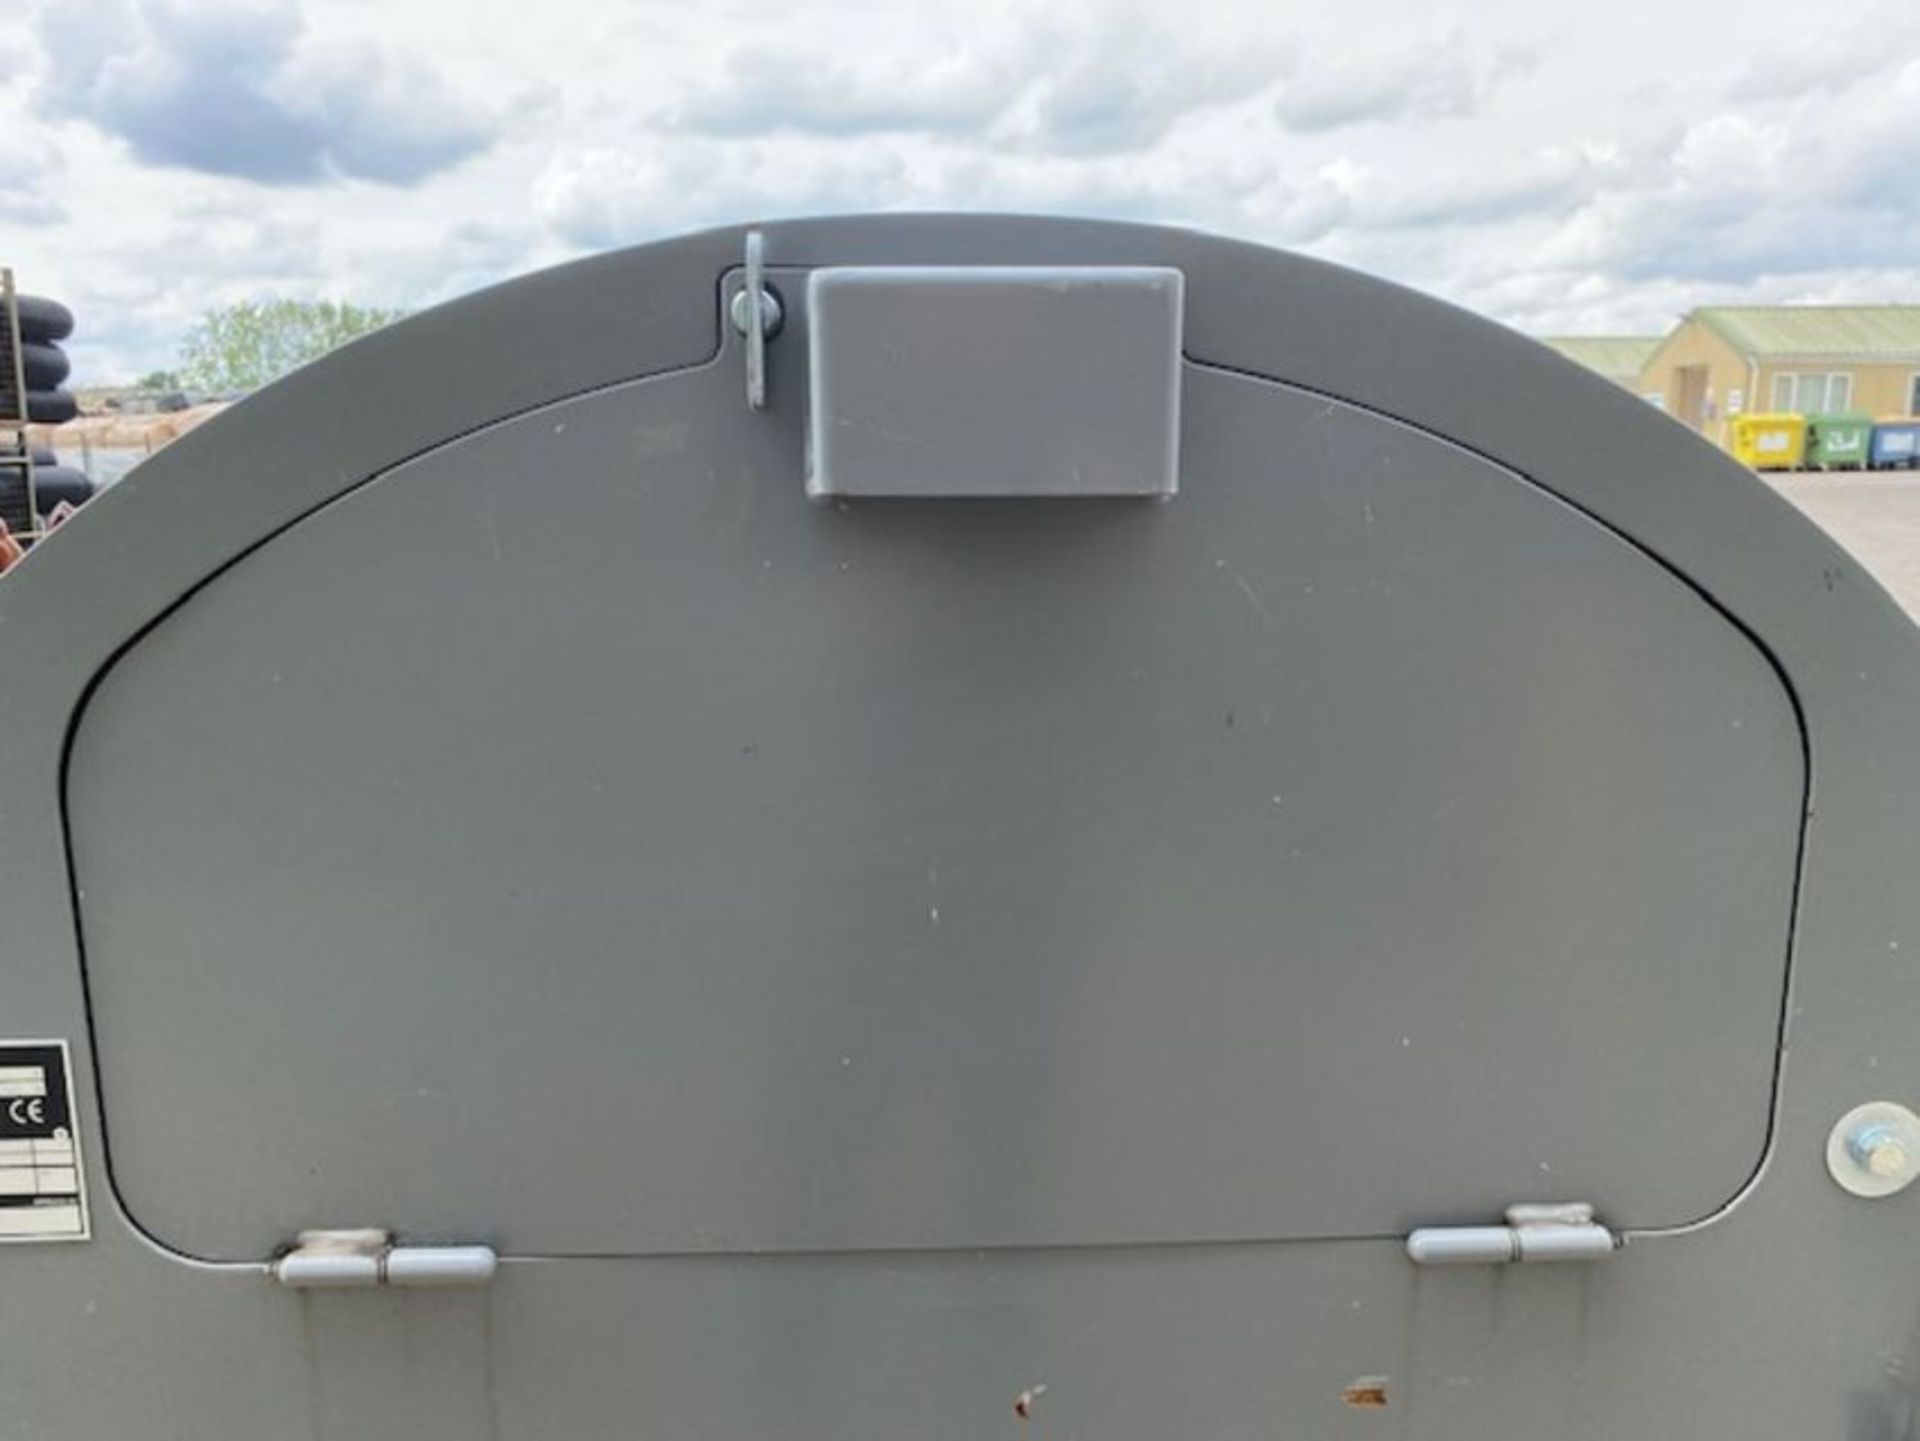 Fuelproof 1000 litre bunded fuel tank - Image 11 of 16